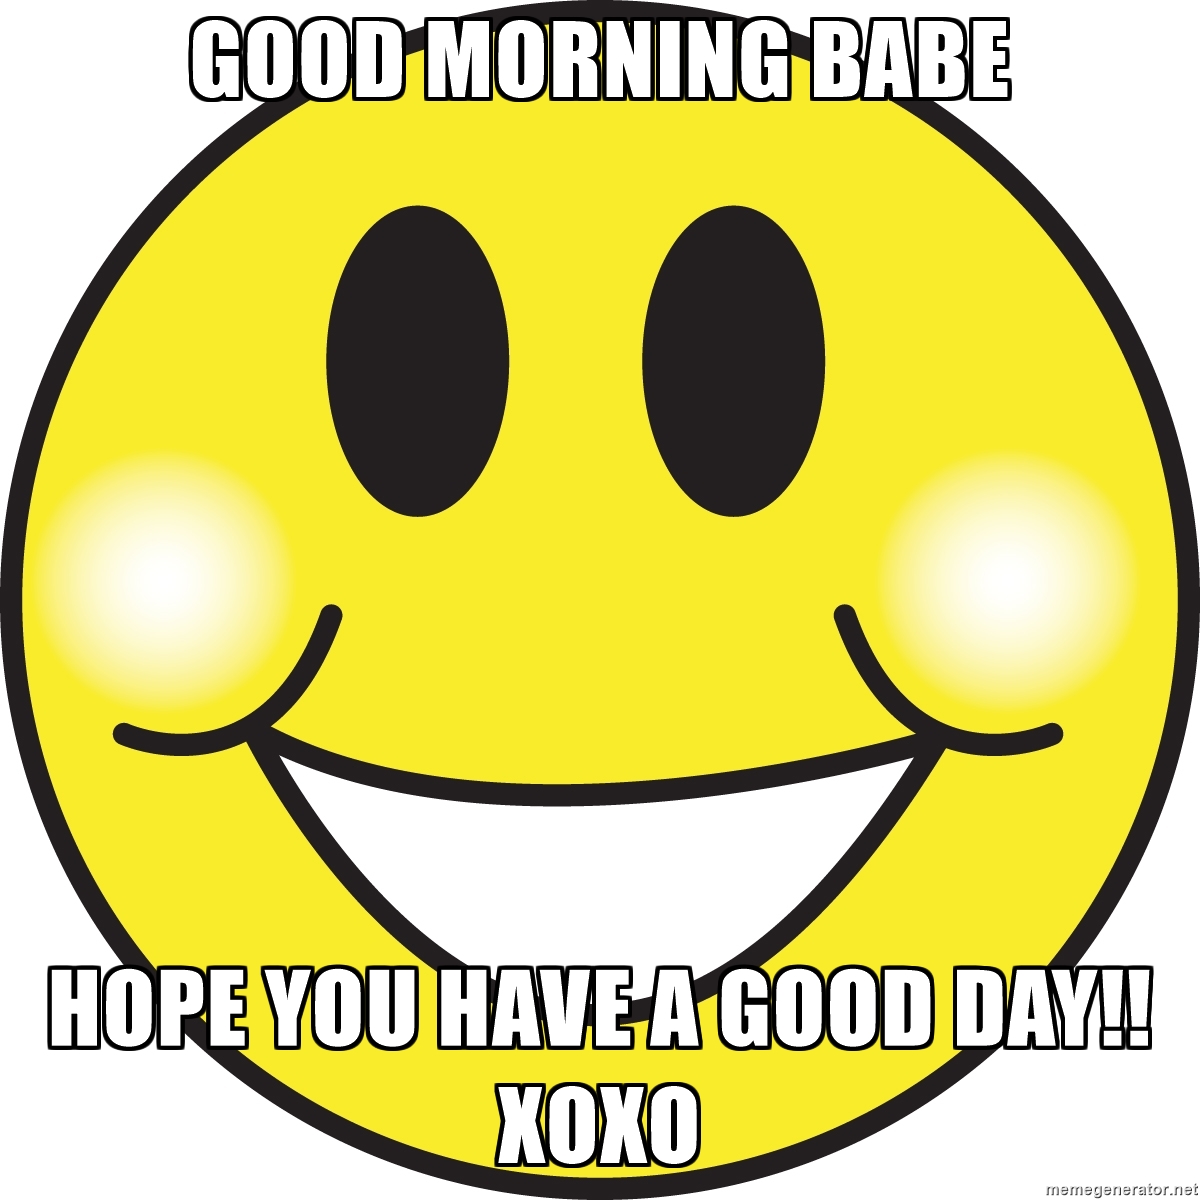 Good Morning Babe Hope you have a good day!! xoxo - BIG, HAPPY ...